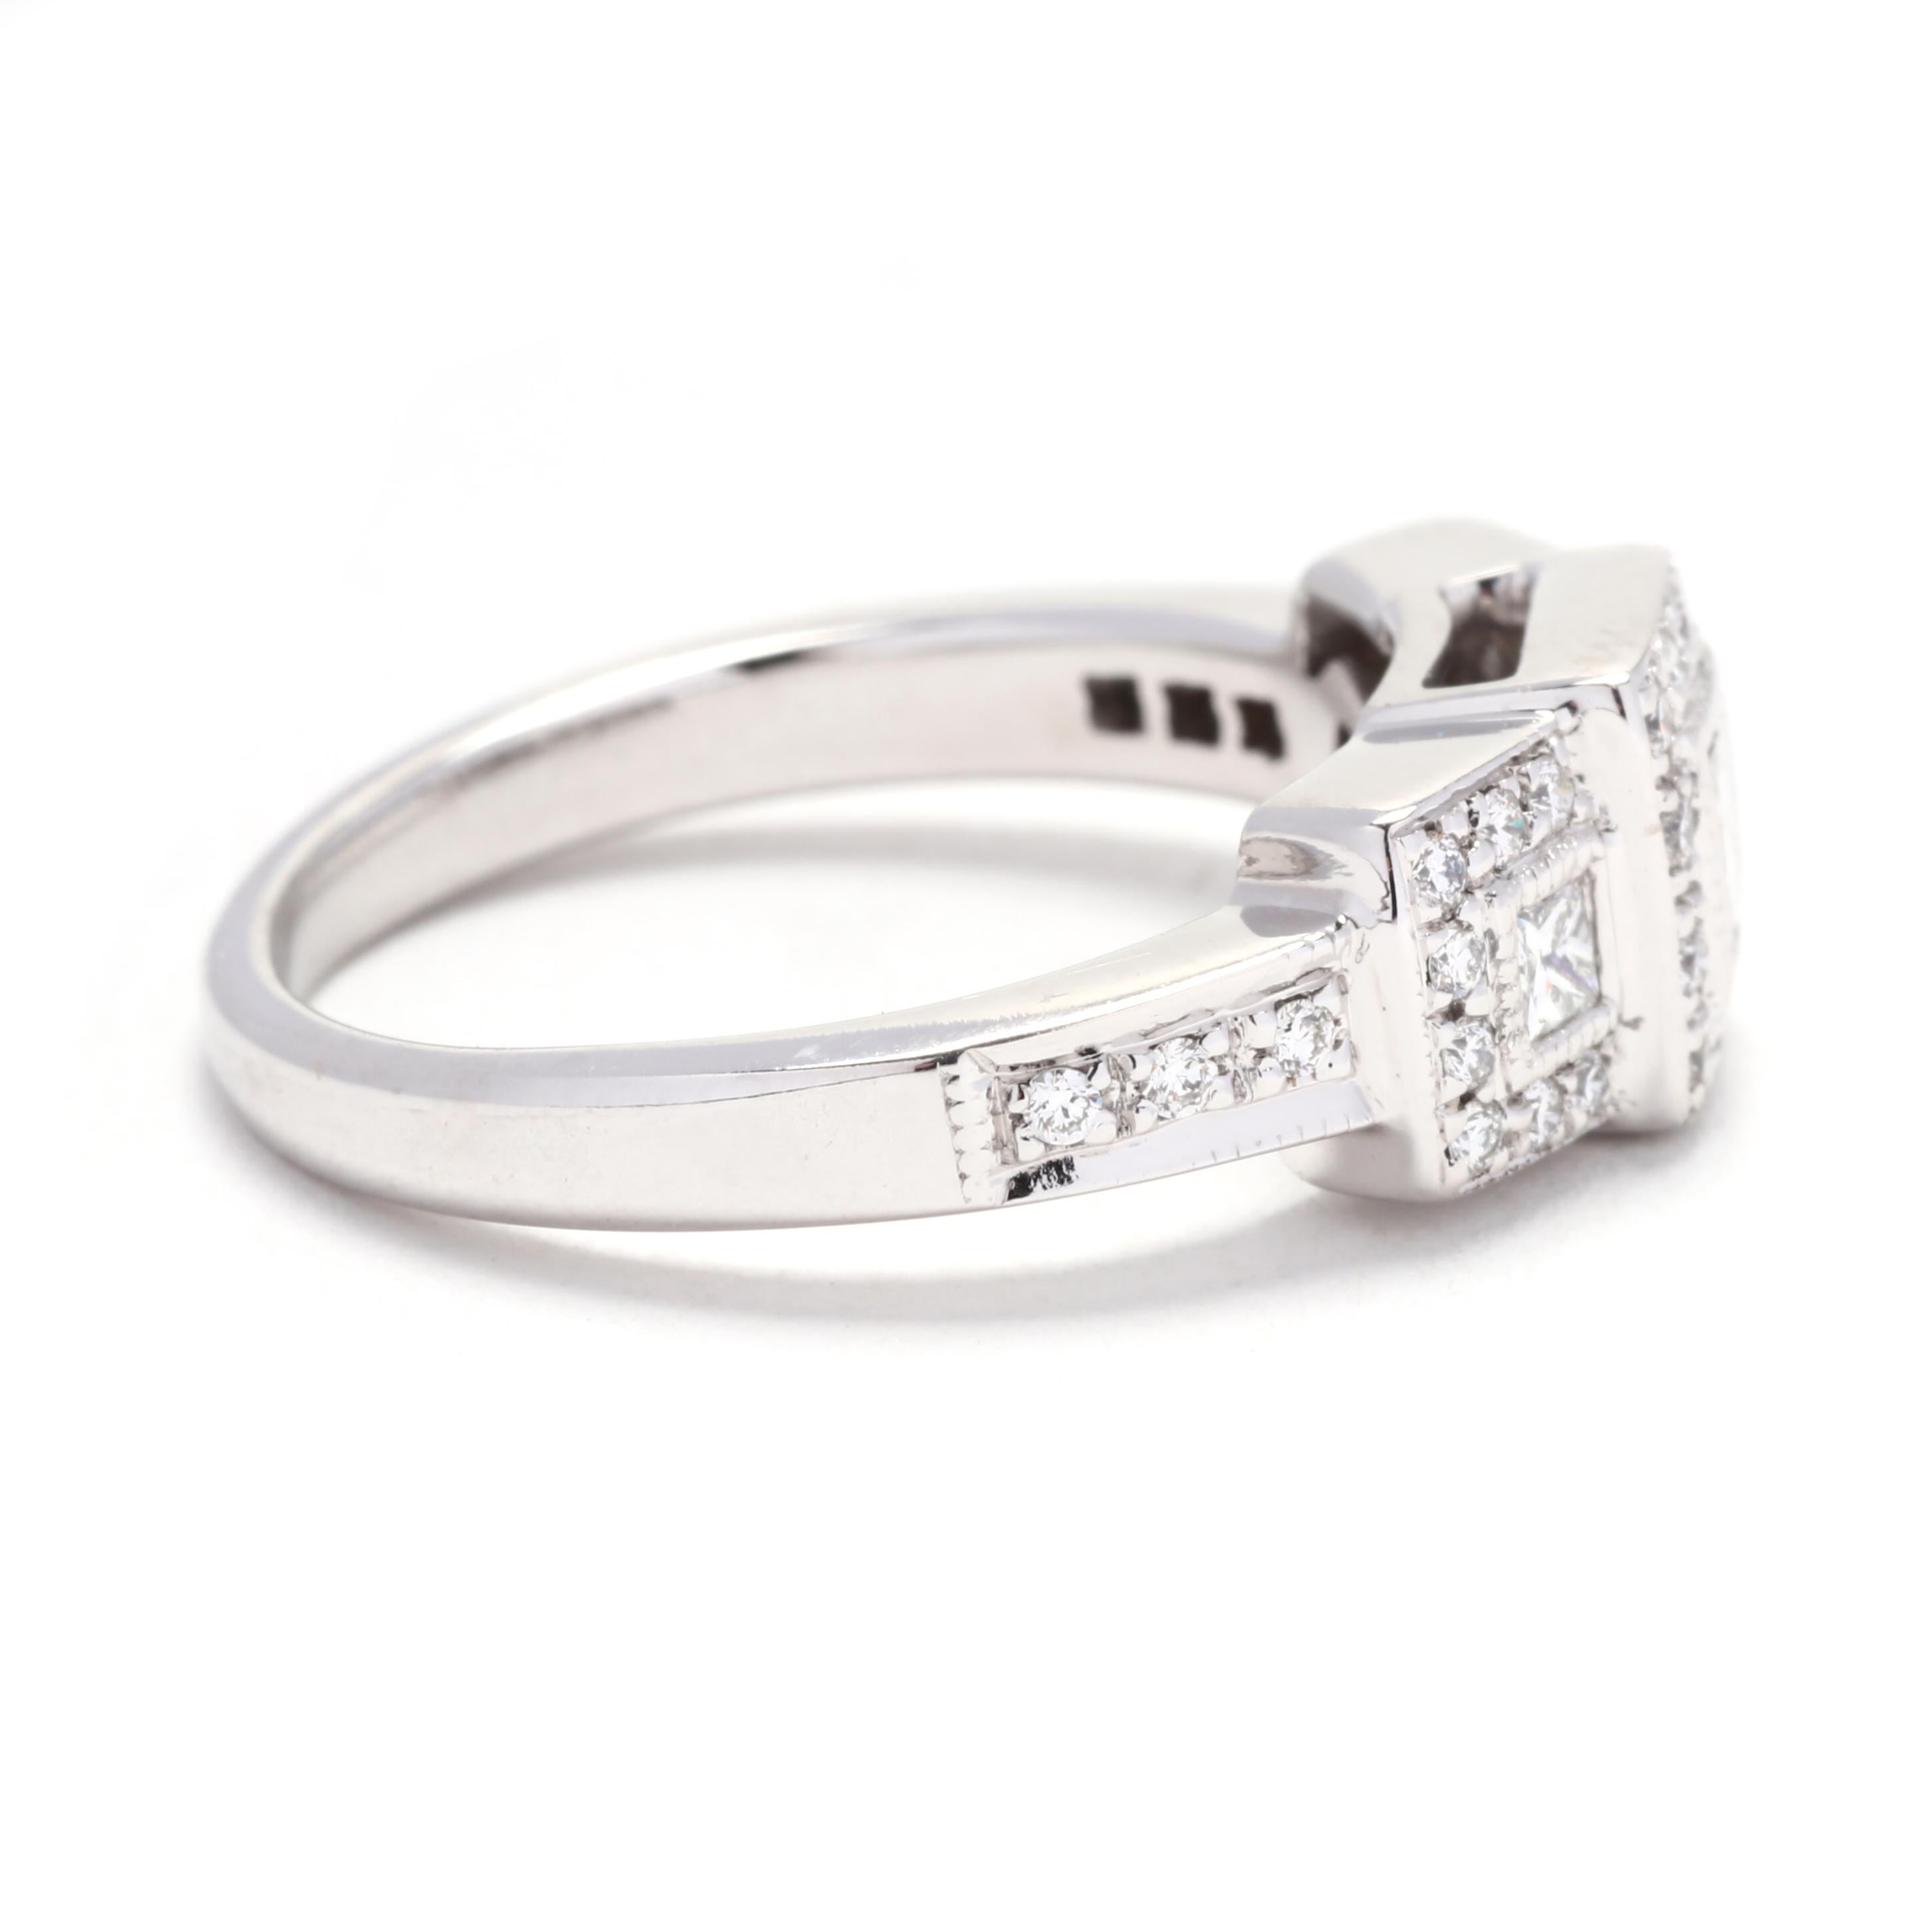 This beautiful 0.57ctw Princess Diamond Multi Stone Engagement Ring is crafted in 14K white gold, creating a timeless and elegant piece. To add extra sparkle and brilliance, the center diamond is surrounded by a halo of smaller round diamonds,